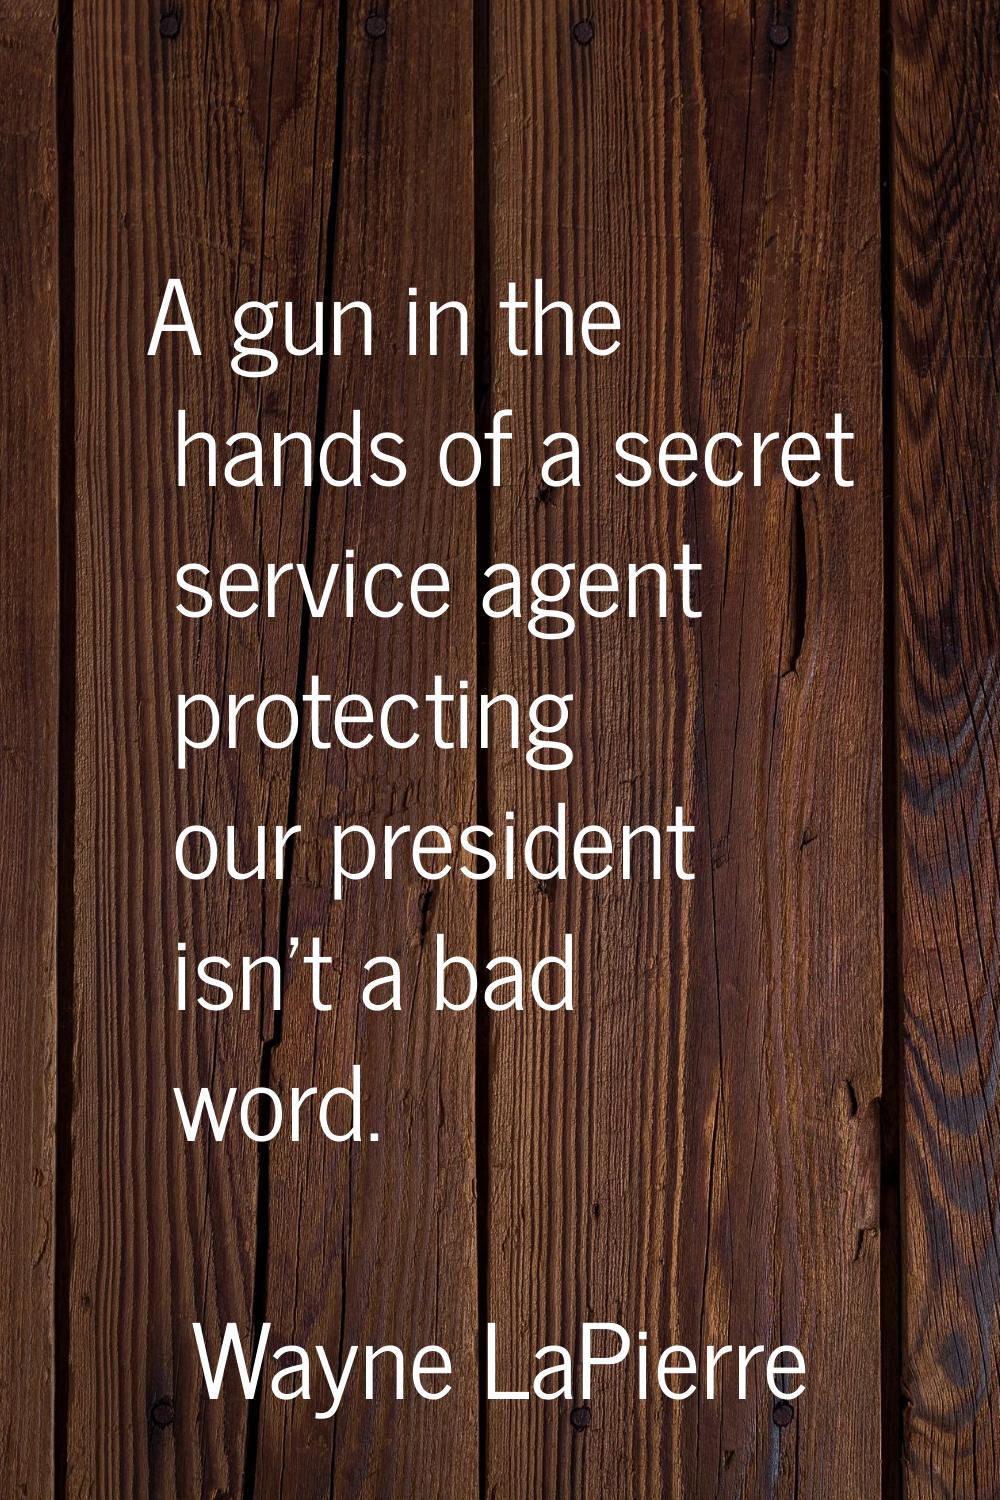 A gun in the hands of a secret service agent protecting our president isn't a bad word.